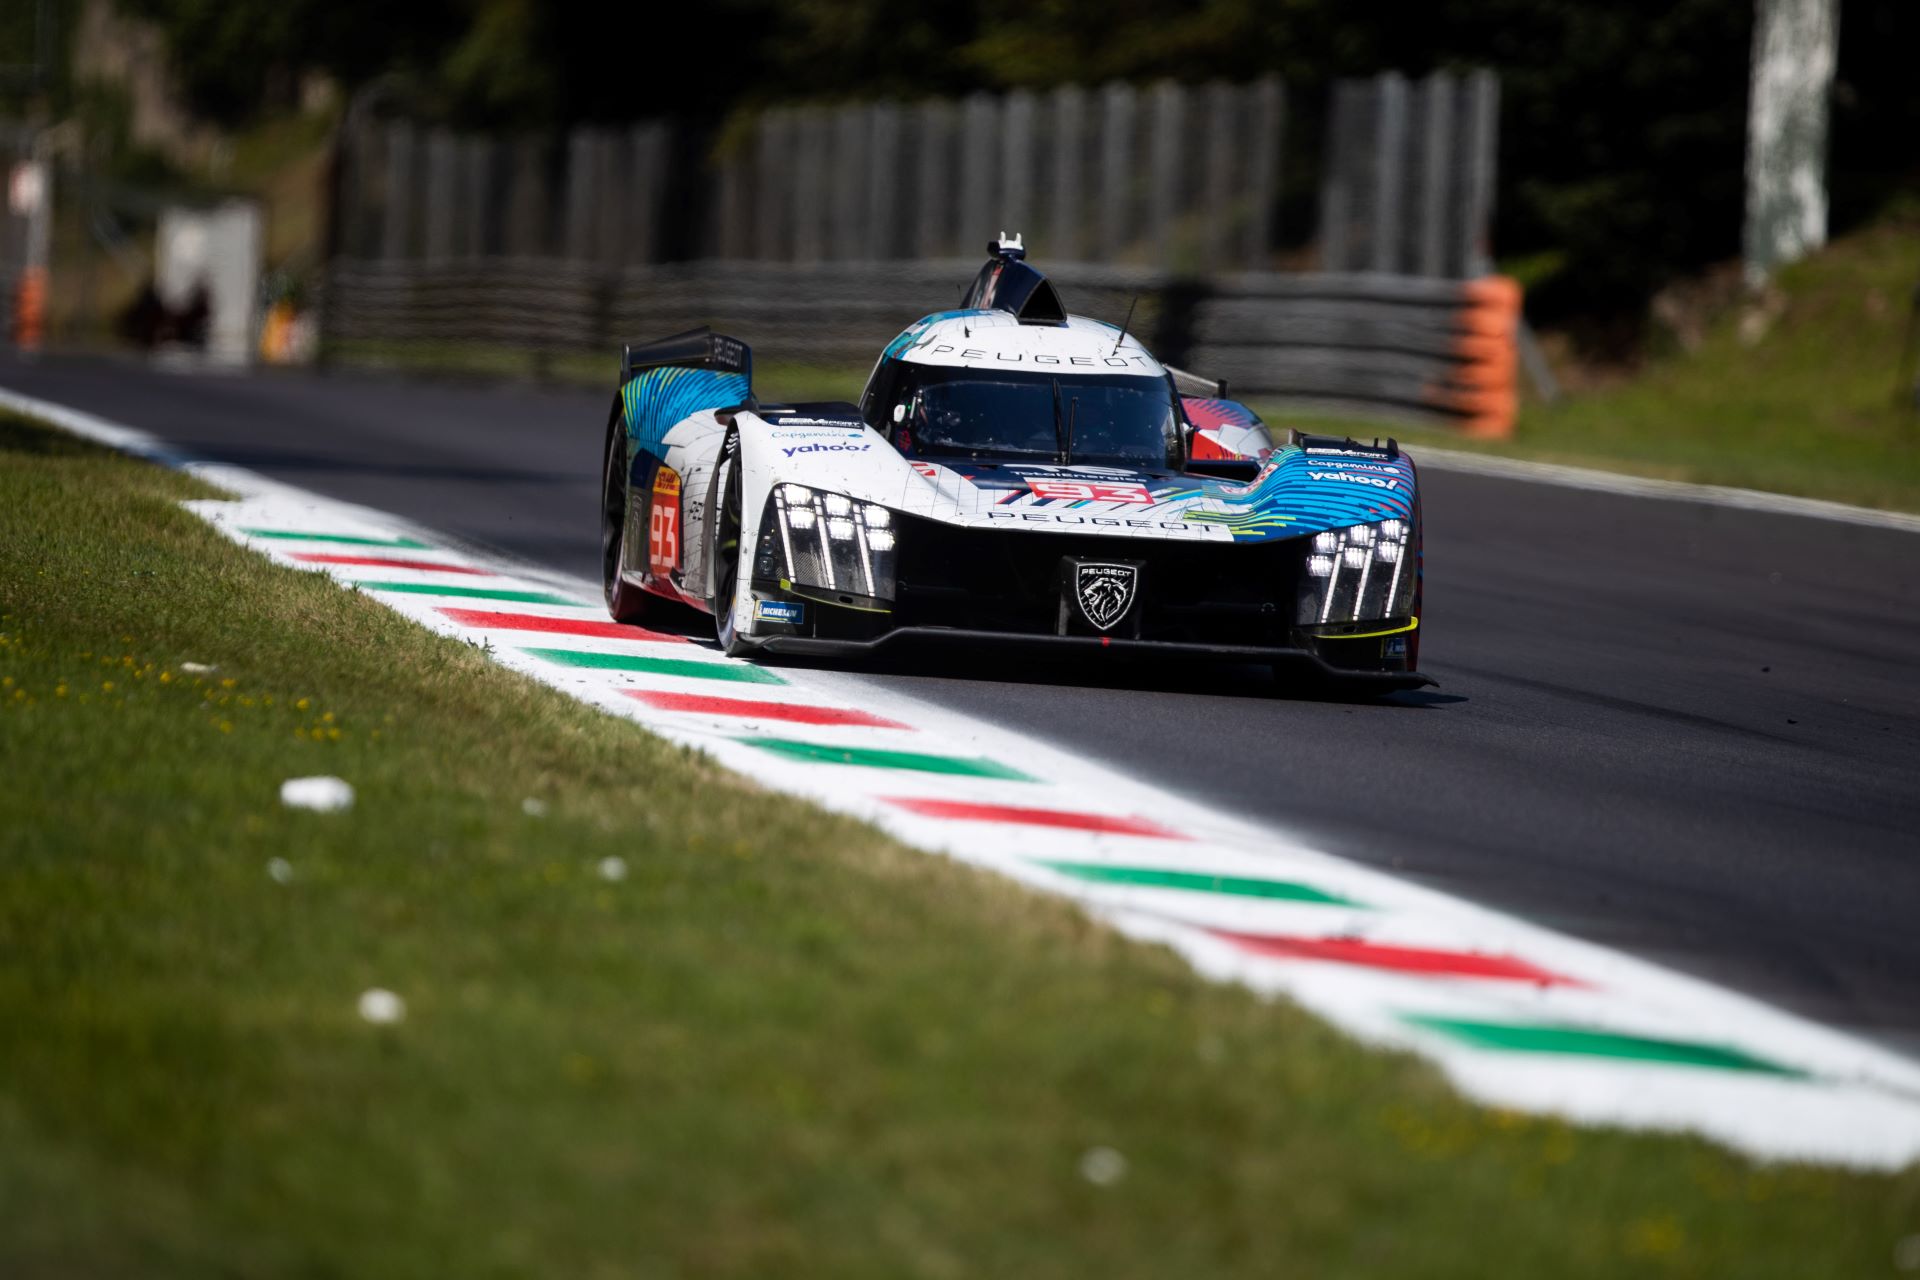 Team Peugeot TotalEnergies looking for another podium in Fuji